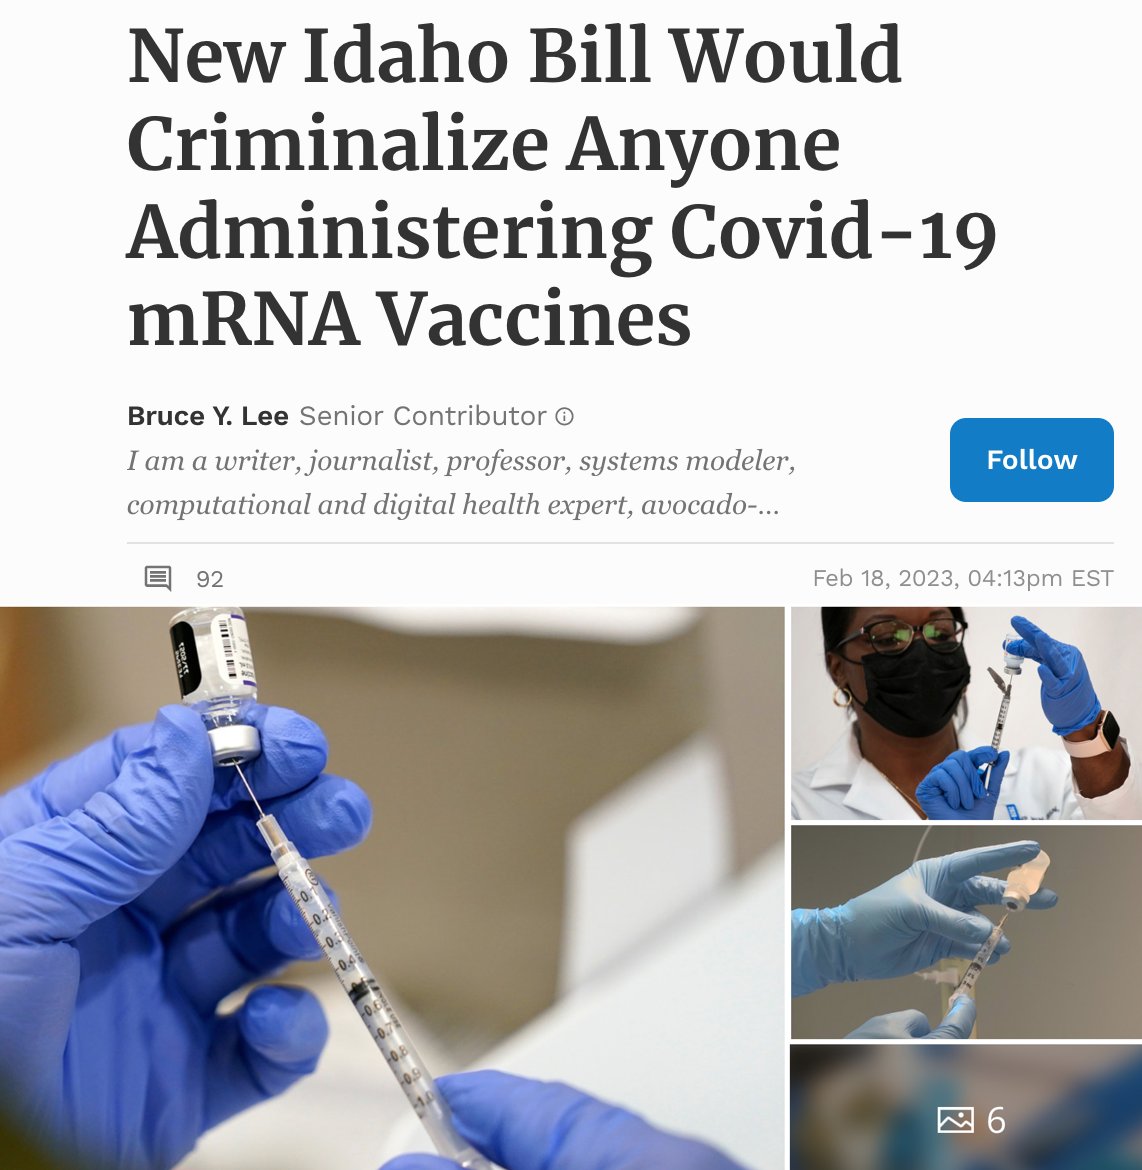 Excellent work Idaho lawmakers!🥳

Let's hope this bill gets passed

After this bill gets enacted into law, we'll have 49 more states to go

#PoliticalAction
#RunForCongress
#YourVoiceMatters
#AllPowerToThePeople

This bioweapon💉should not be given to anyone, anywhere on earth